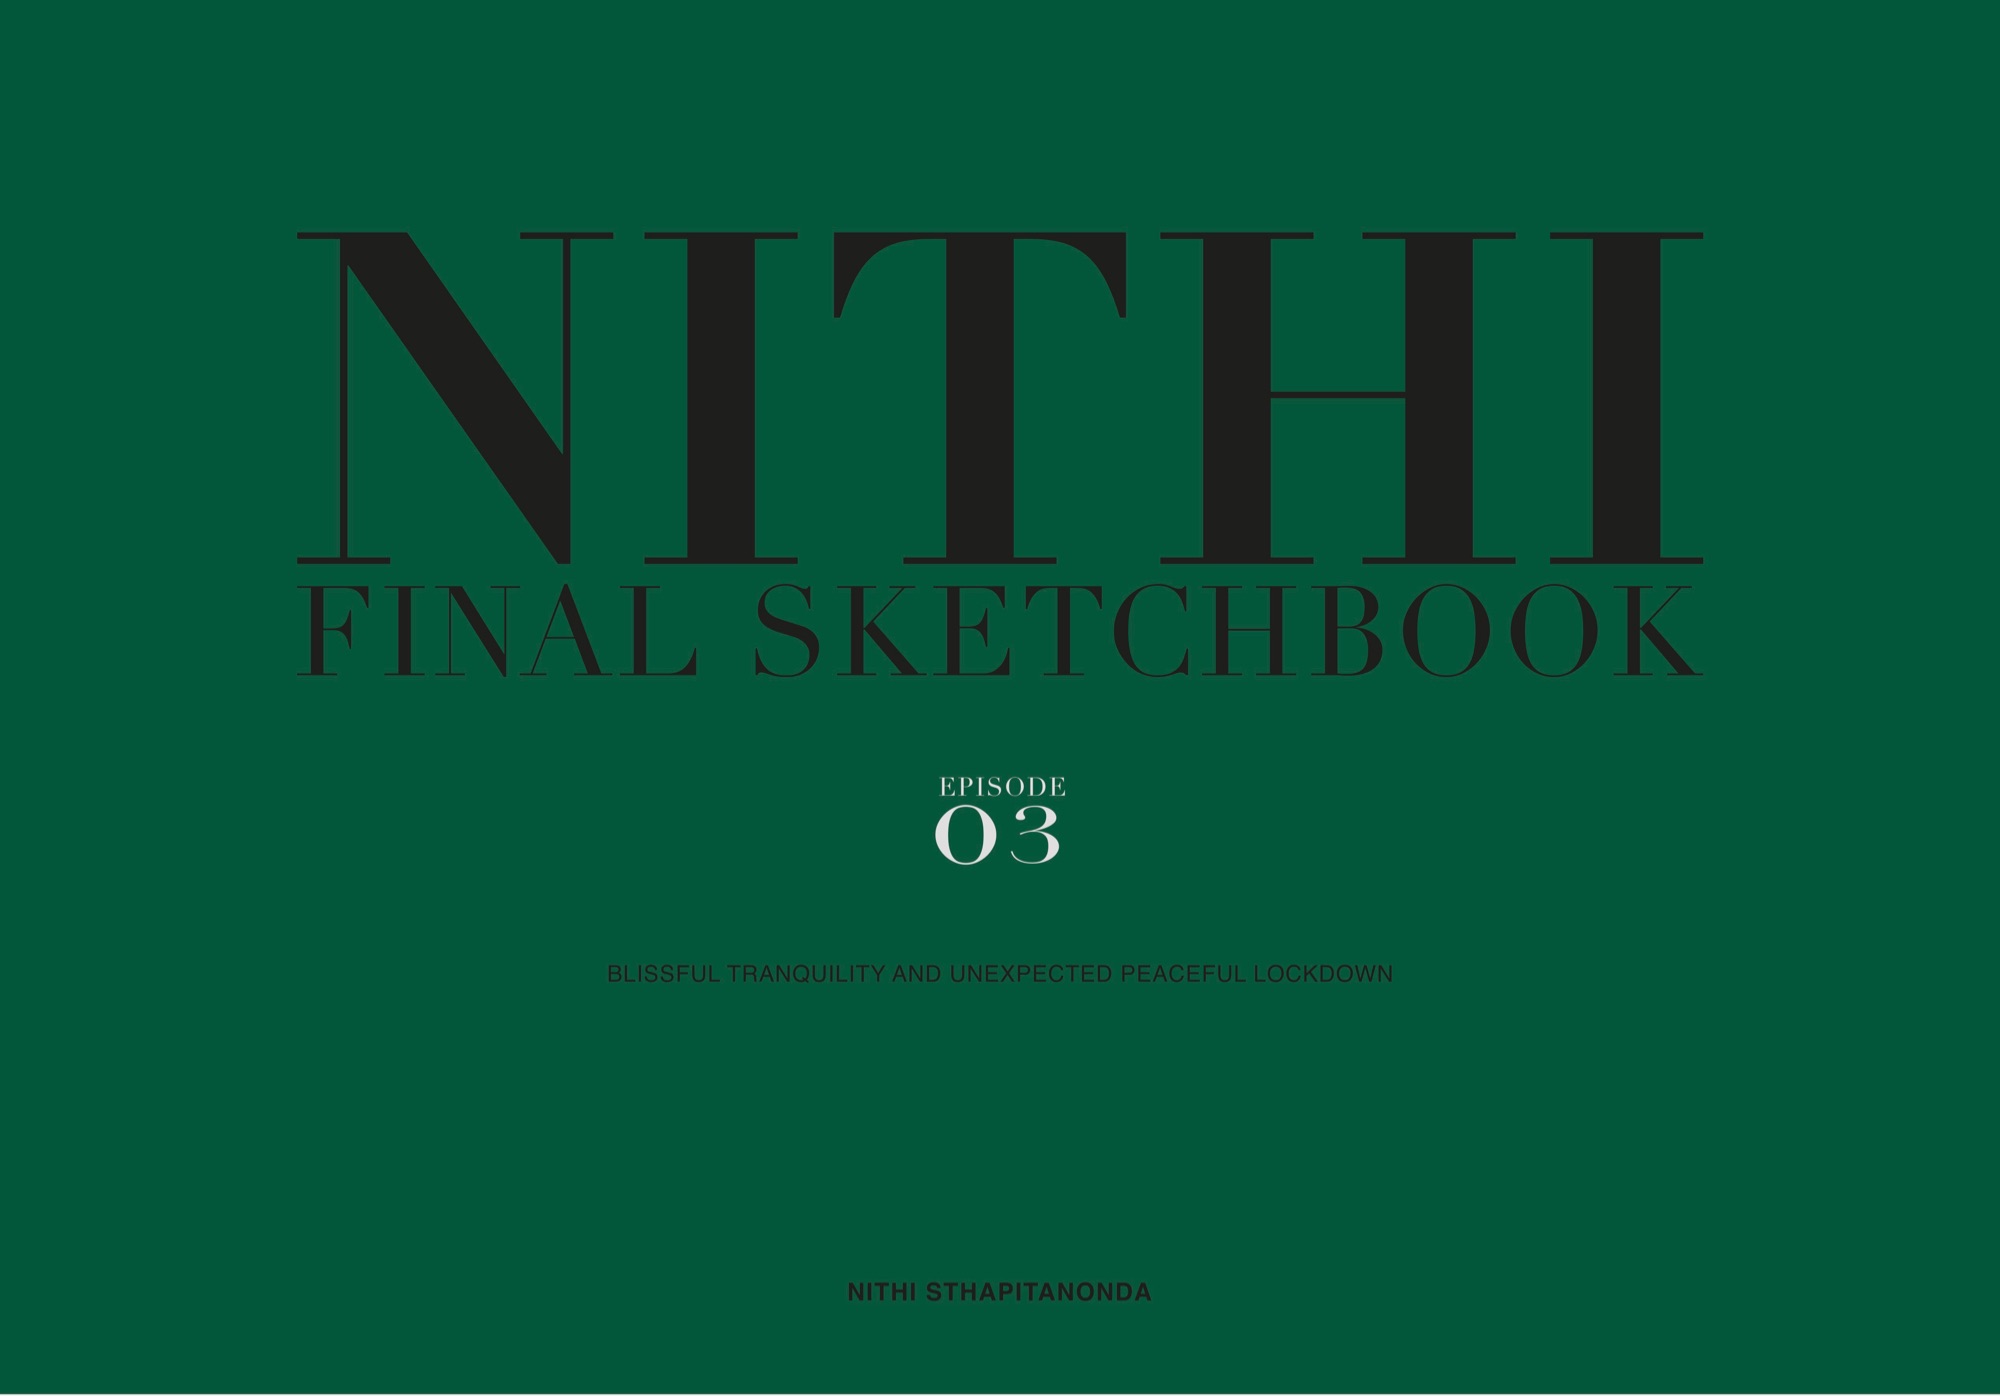 NITHI FINAL SKETHCBOOK EPISODE 3: Blissful Tranquility and Unexpected Peaceful Lock down